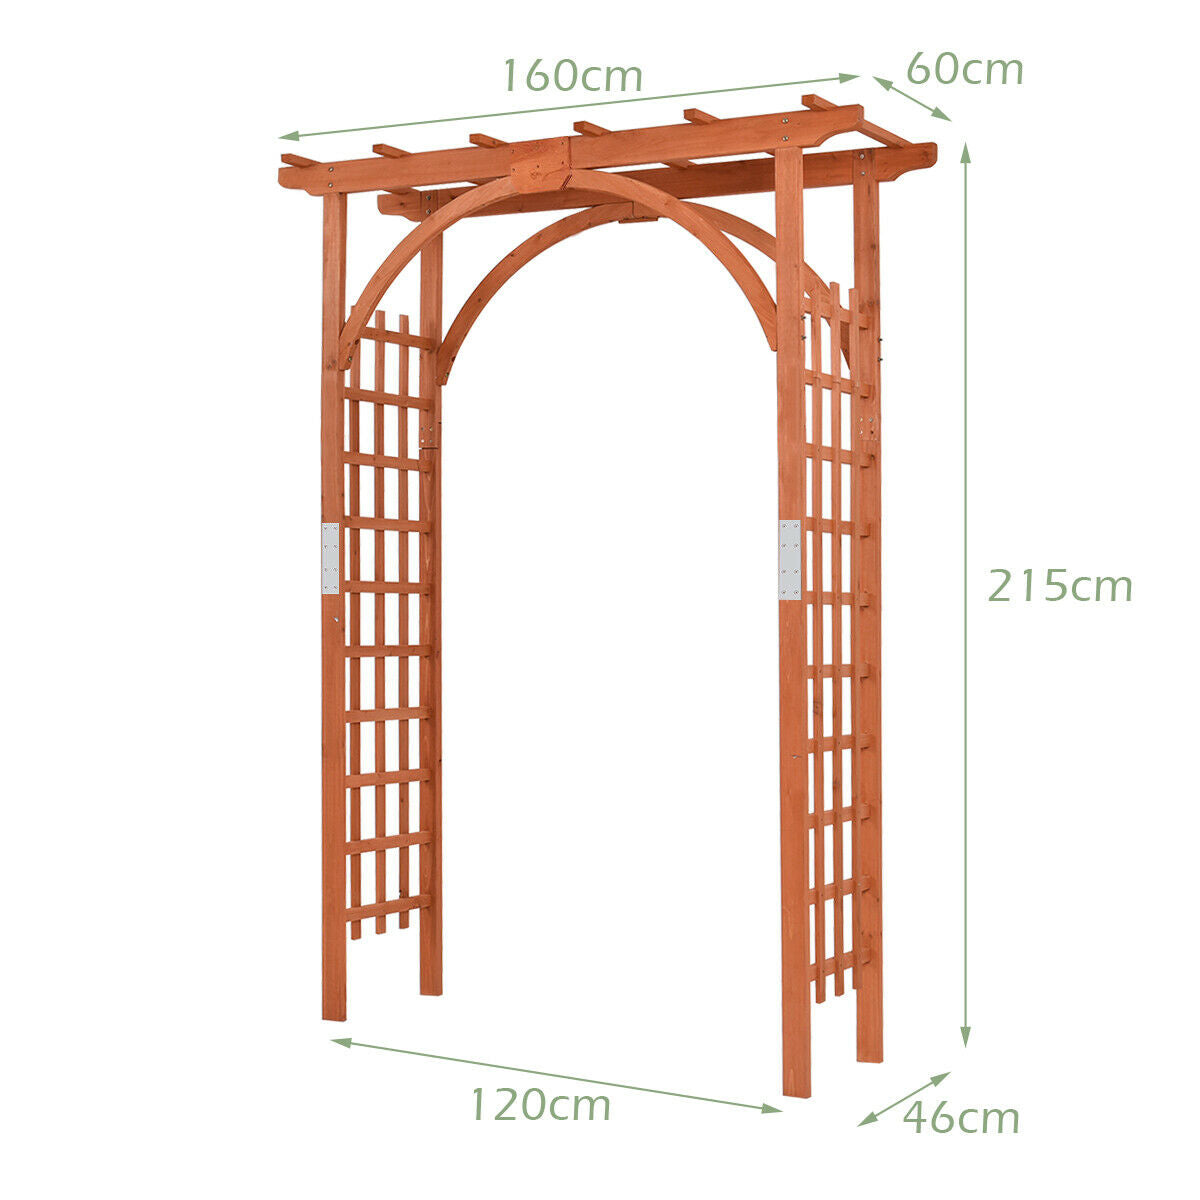 Wood Arbor Arch with Support Rack for Garden Plants and Flowers Decoration